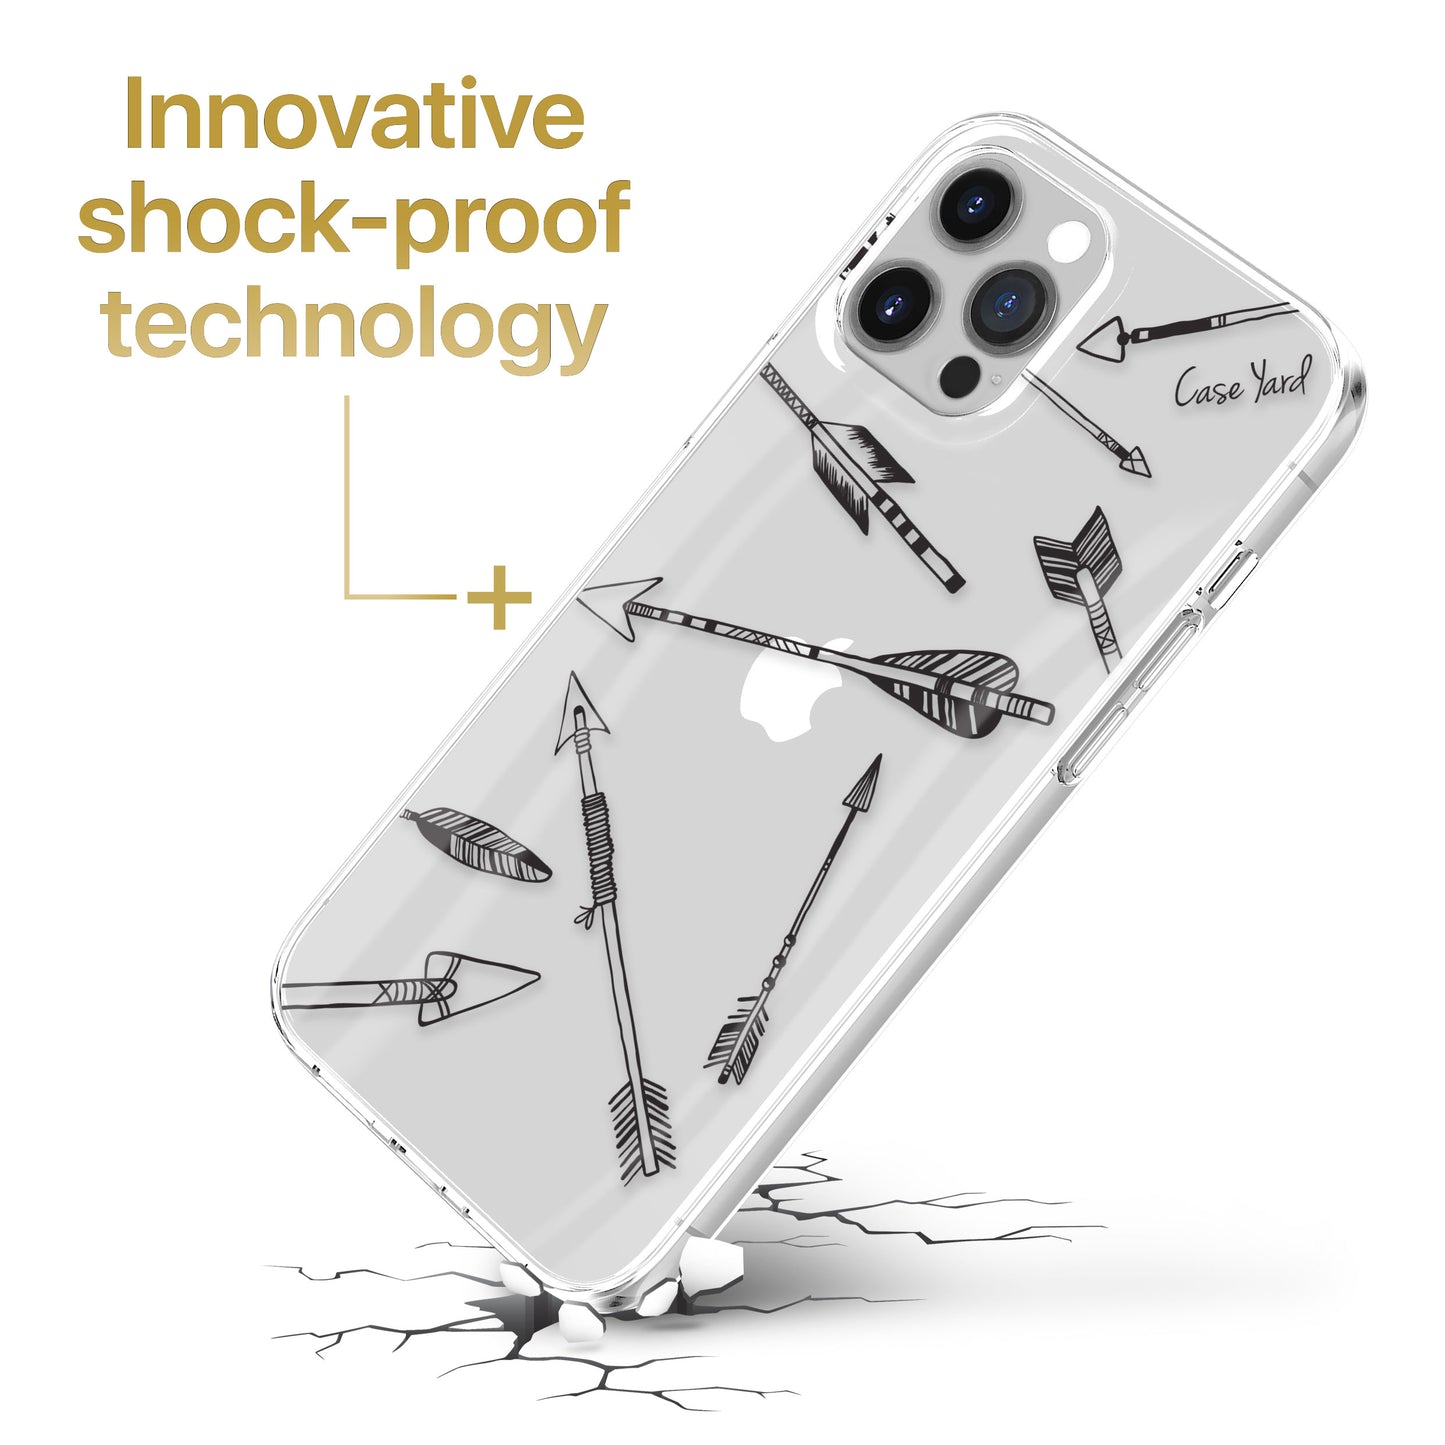 TPU Clear case with (Arrows) Design for iPhone & Samsung Phones